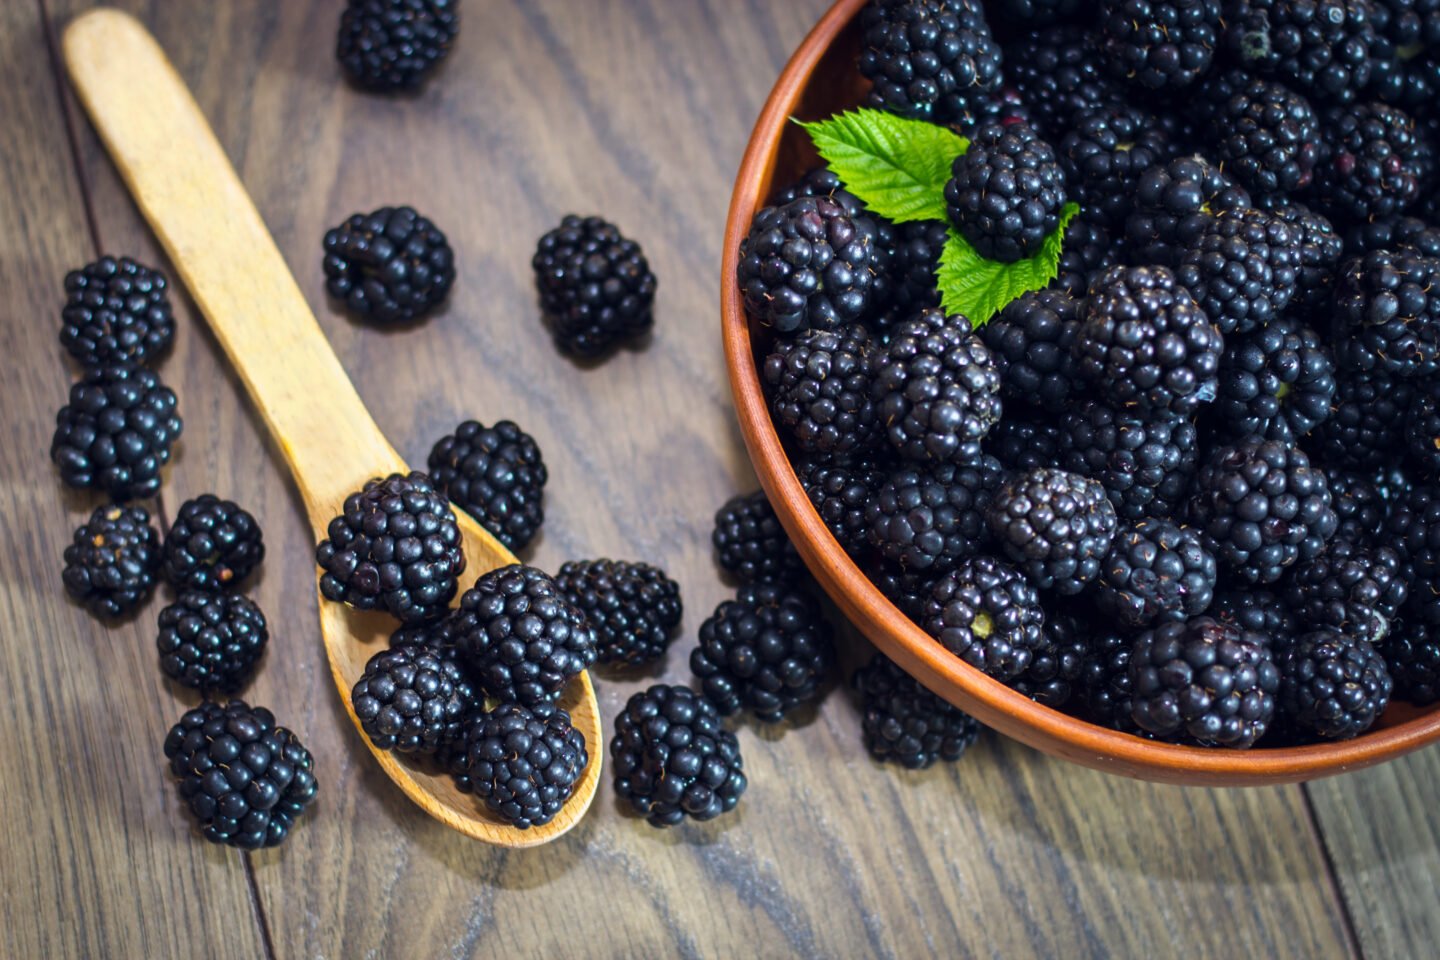 Ripe,Blackberries,With,Leaves,In,A,Clay,Bowl,On,A